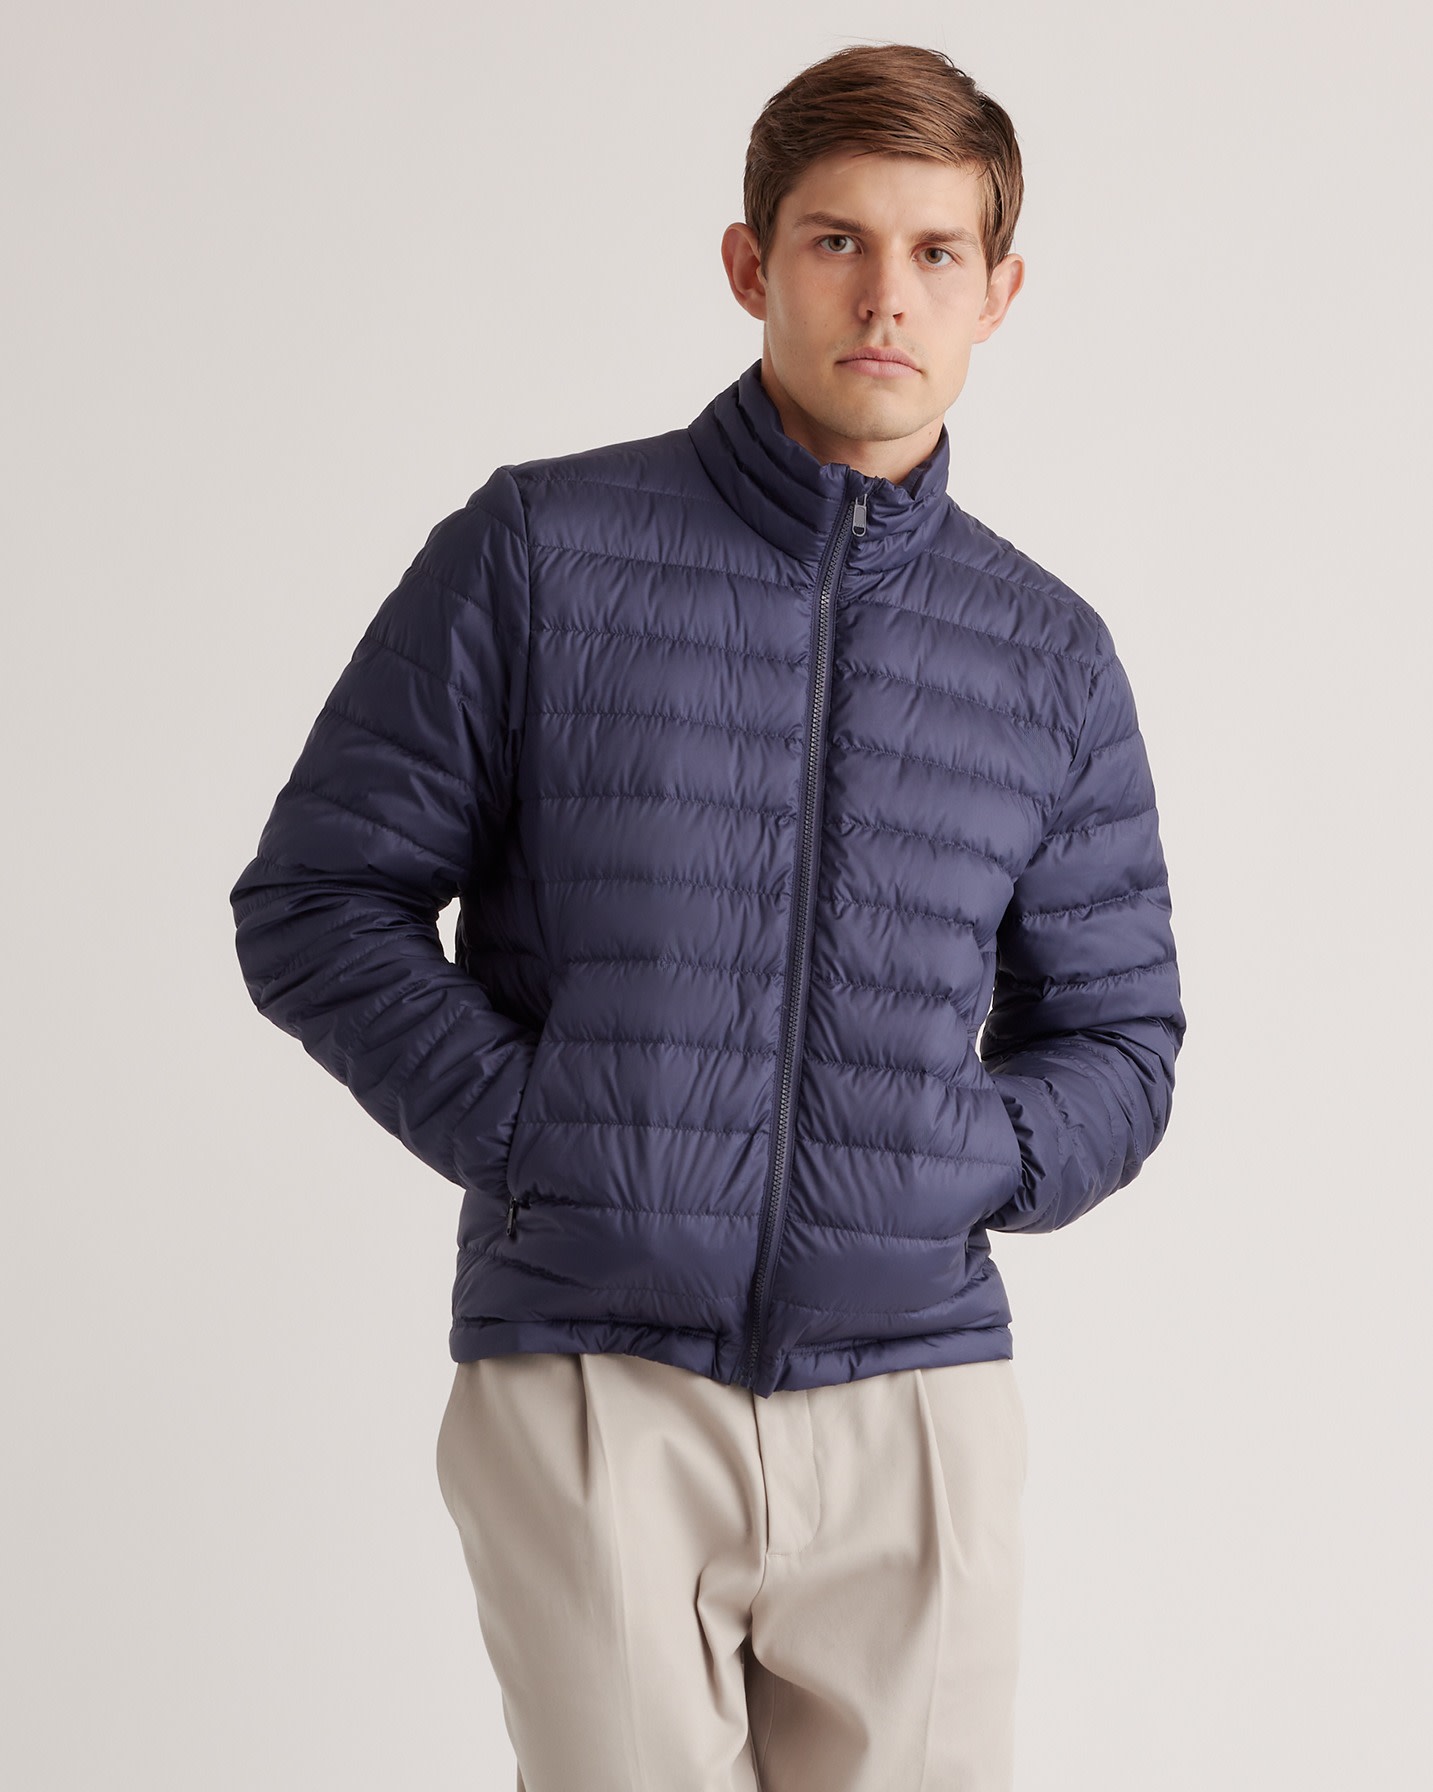 In the realm of men's outerwear, lightweight down jacket men's as versatile staples that offer warmth, comfort,